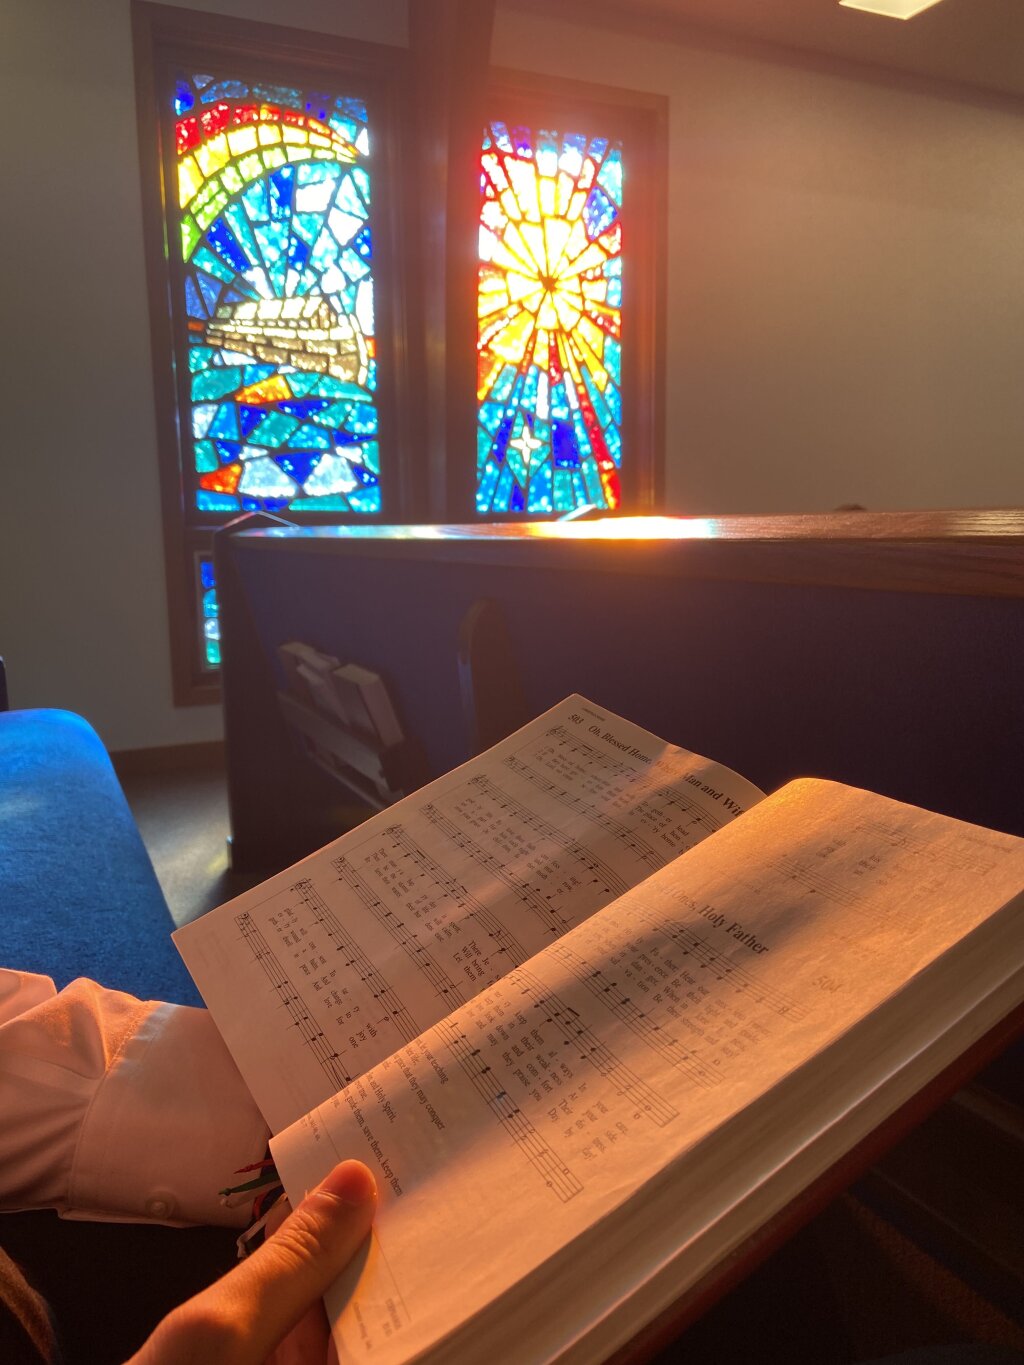 Open hymnal with light streaming through stained glass windows.